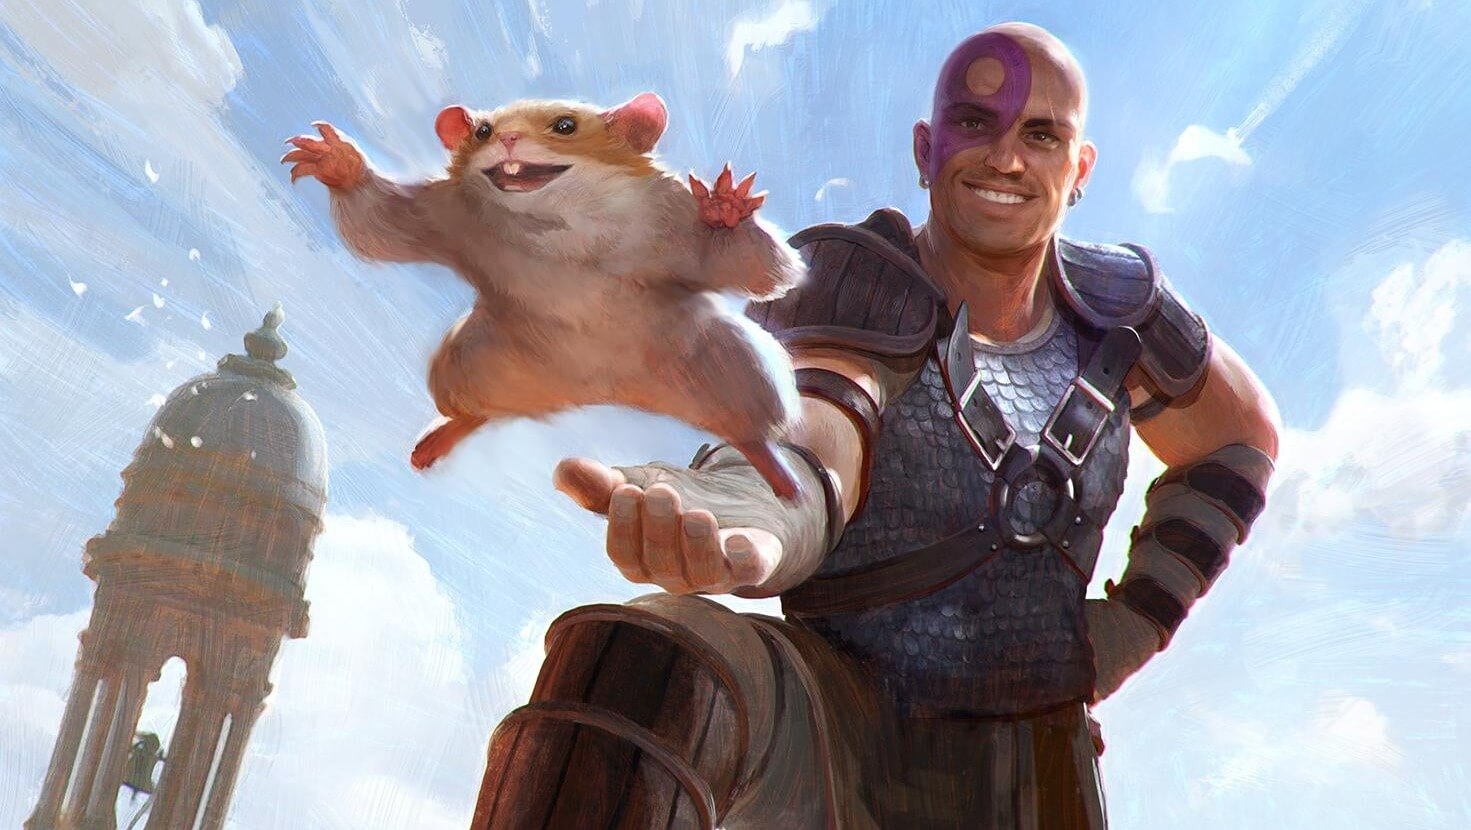 Minsc and Boo as they appear on card art in Magic the Gathering's Battle for Baldur's Gate cross-over set